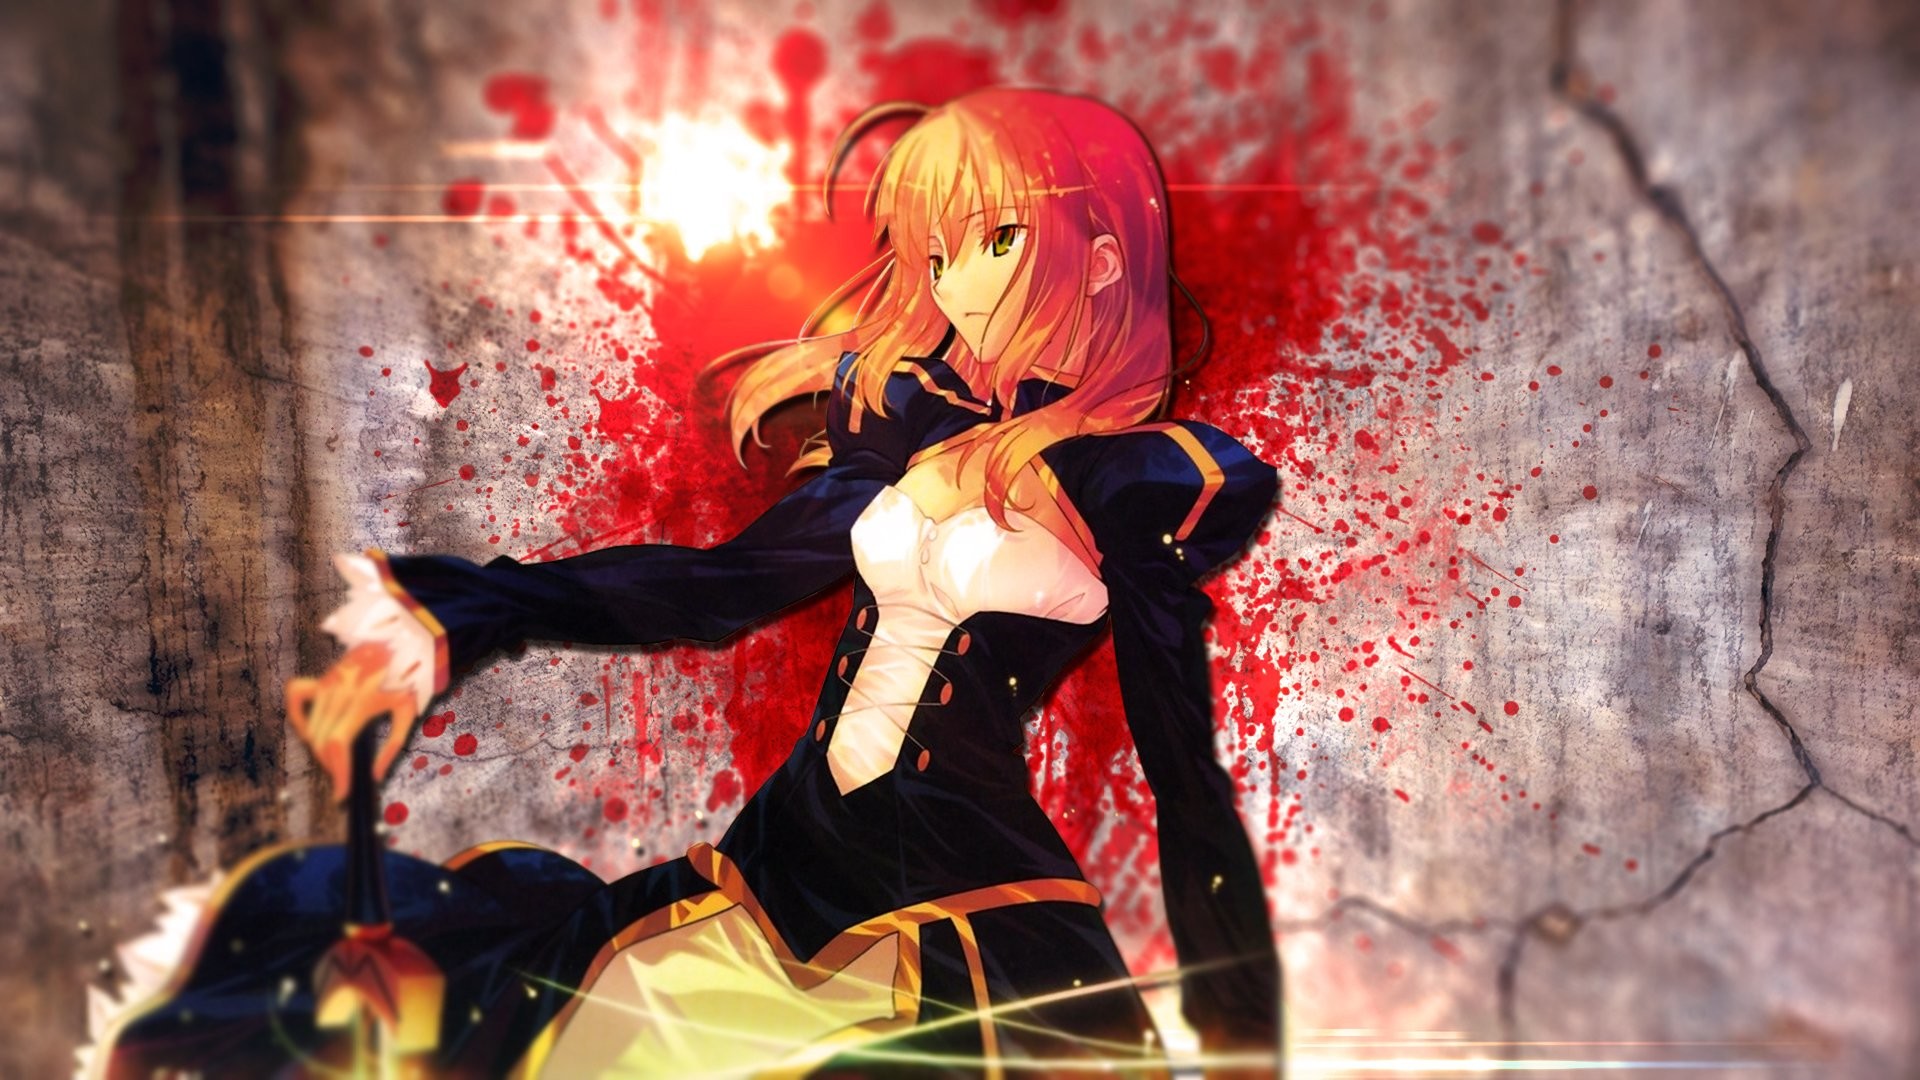 1920x1080 Anime - Fate/Stay Night Saber (Fate Series) Wallpaper